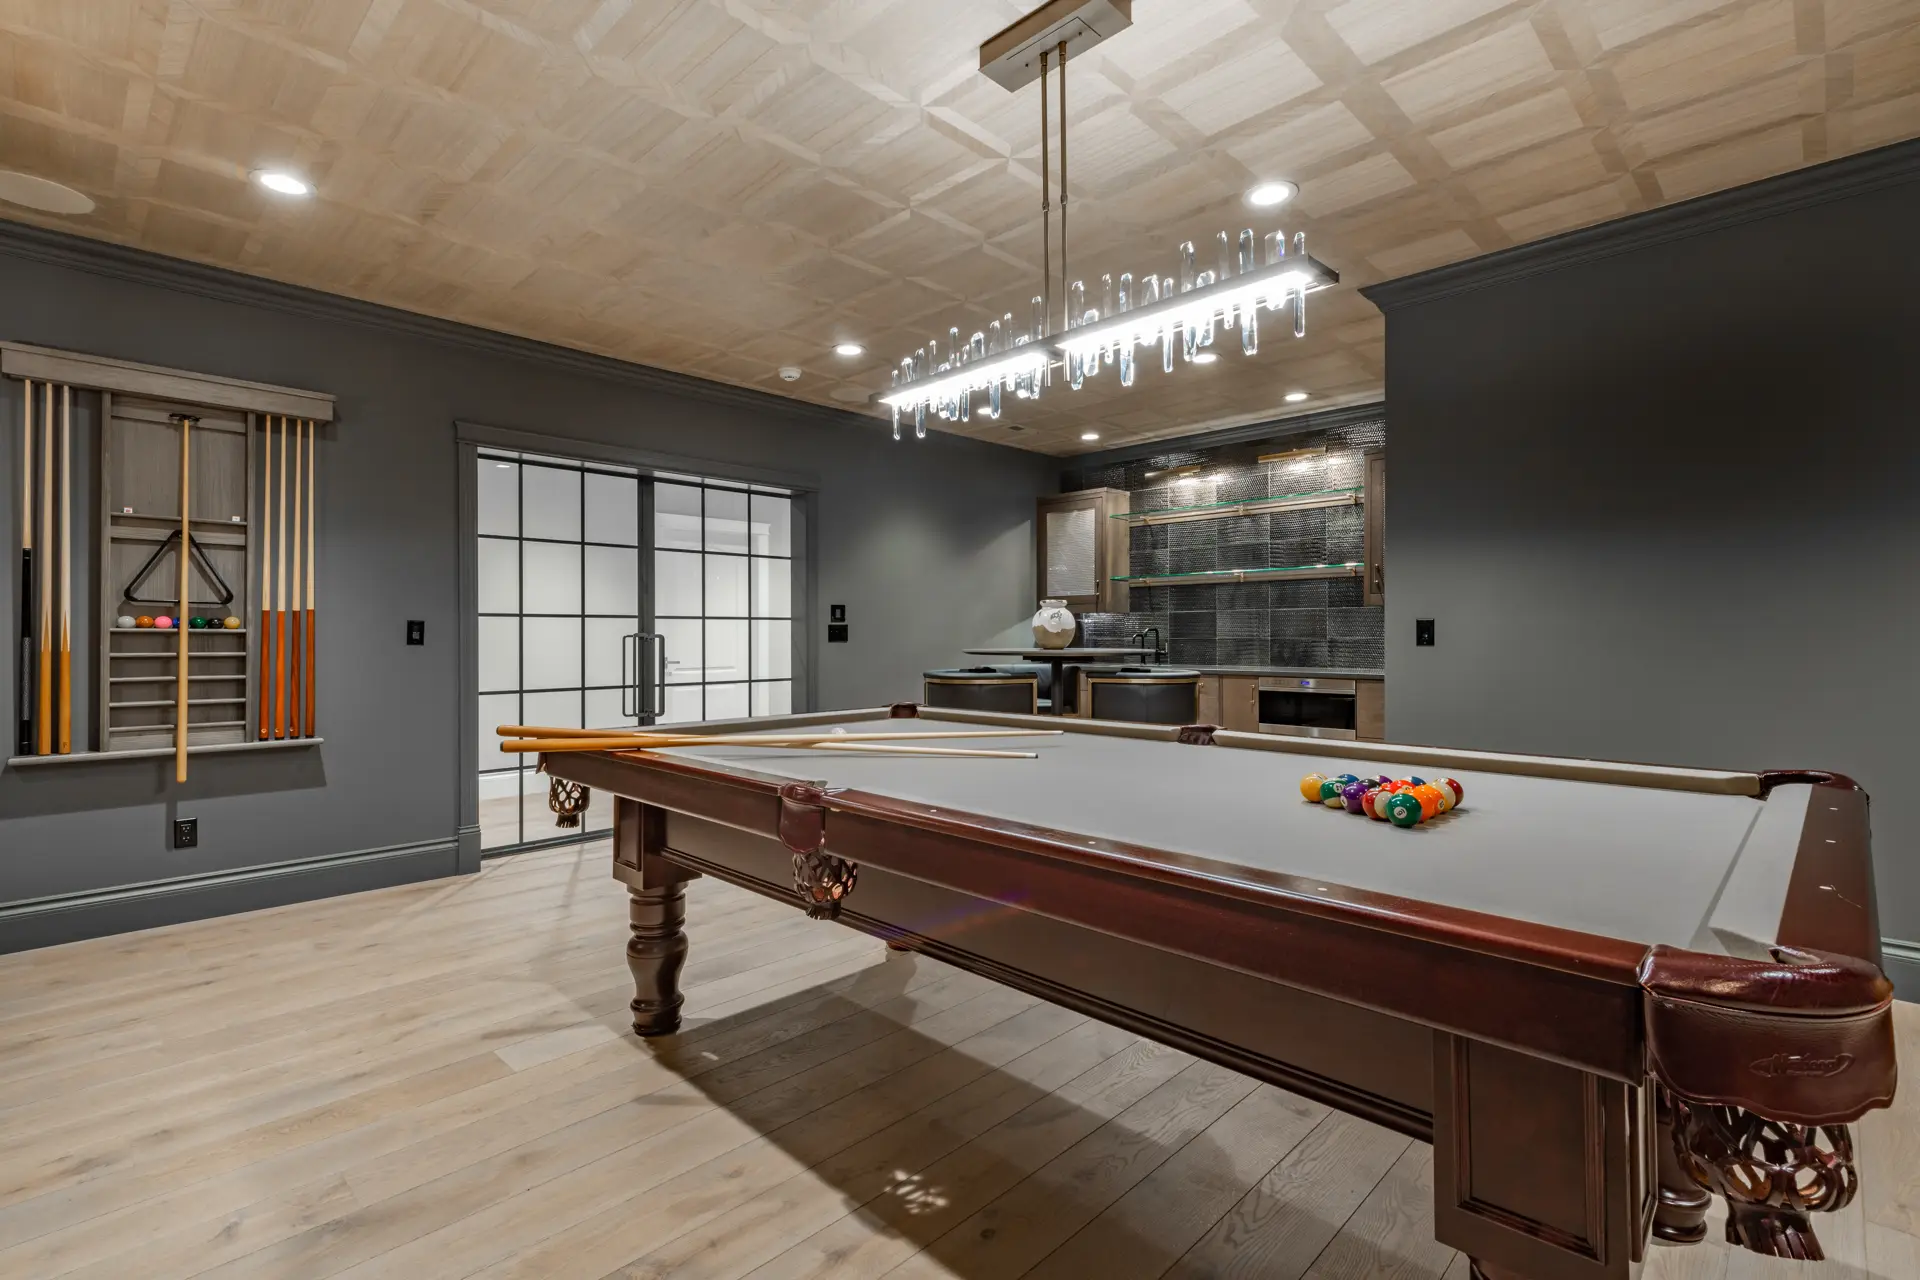 Finished Basement Pool Table Modern Fixtures